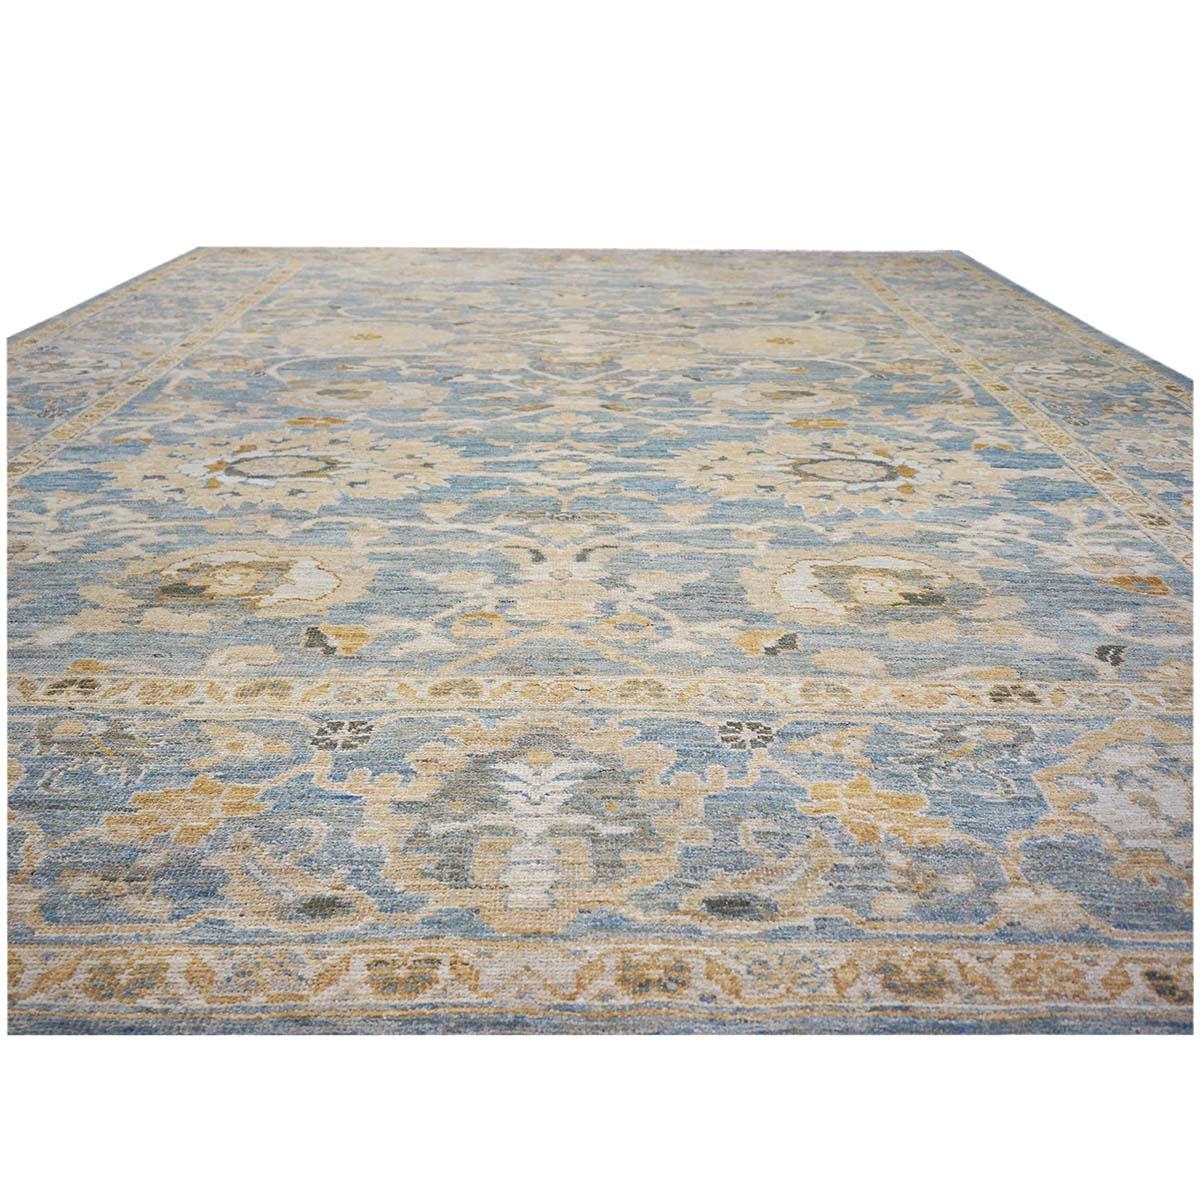 21st Century Persian Sultanabad 9x12 Blue, Tan, & Yellow Handmade Area Rug In Excellent Condition For Sale In Houston, TX